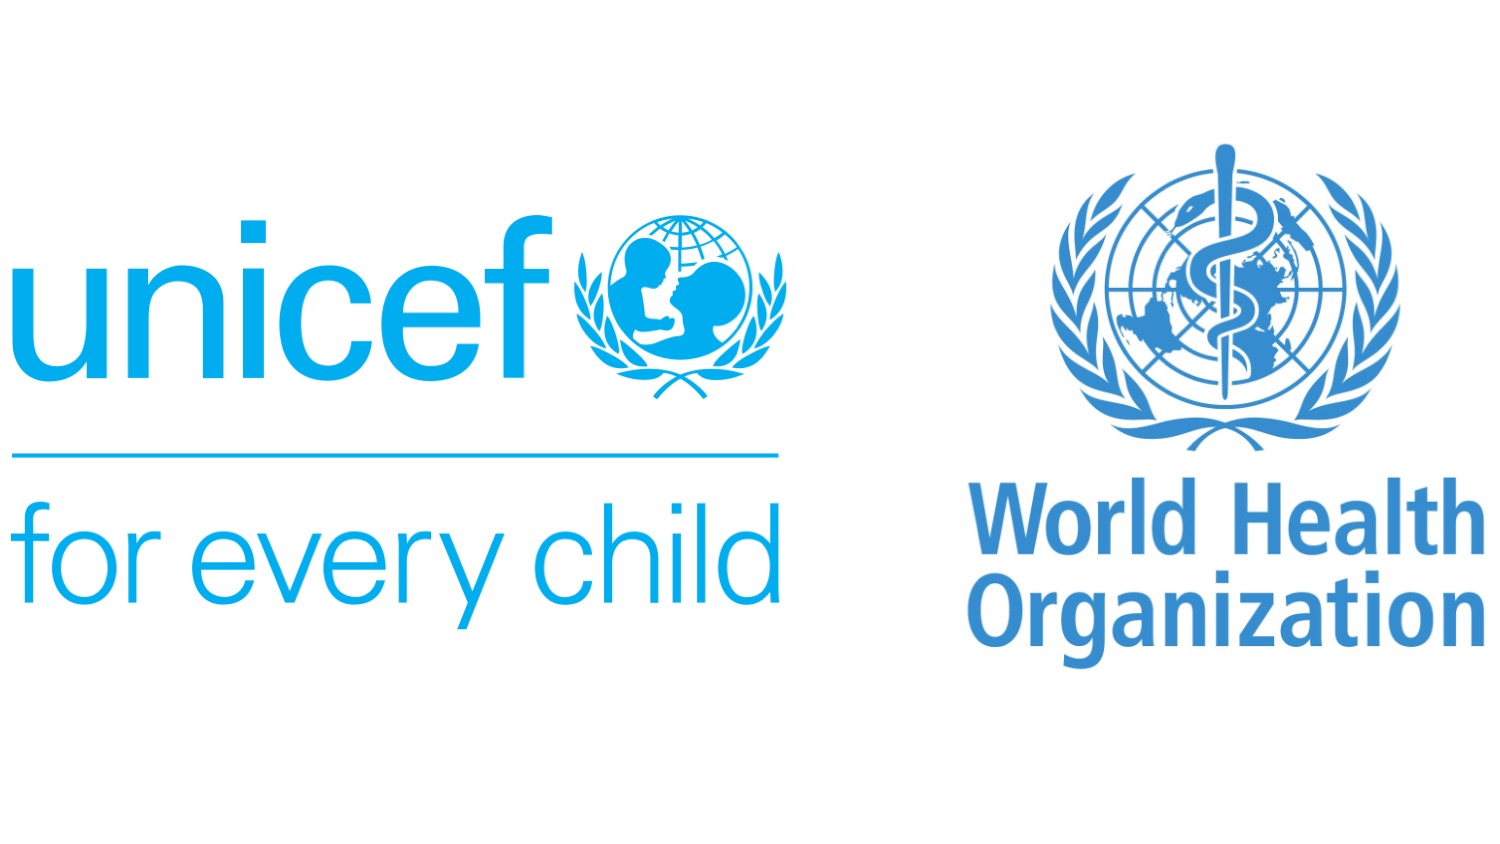 UNICEF and WHO logos